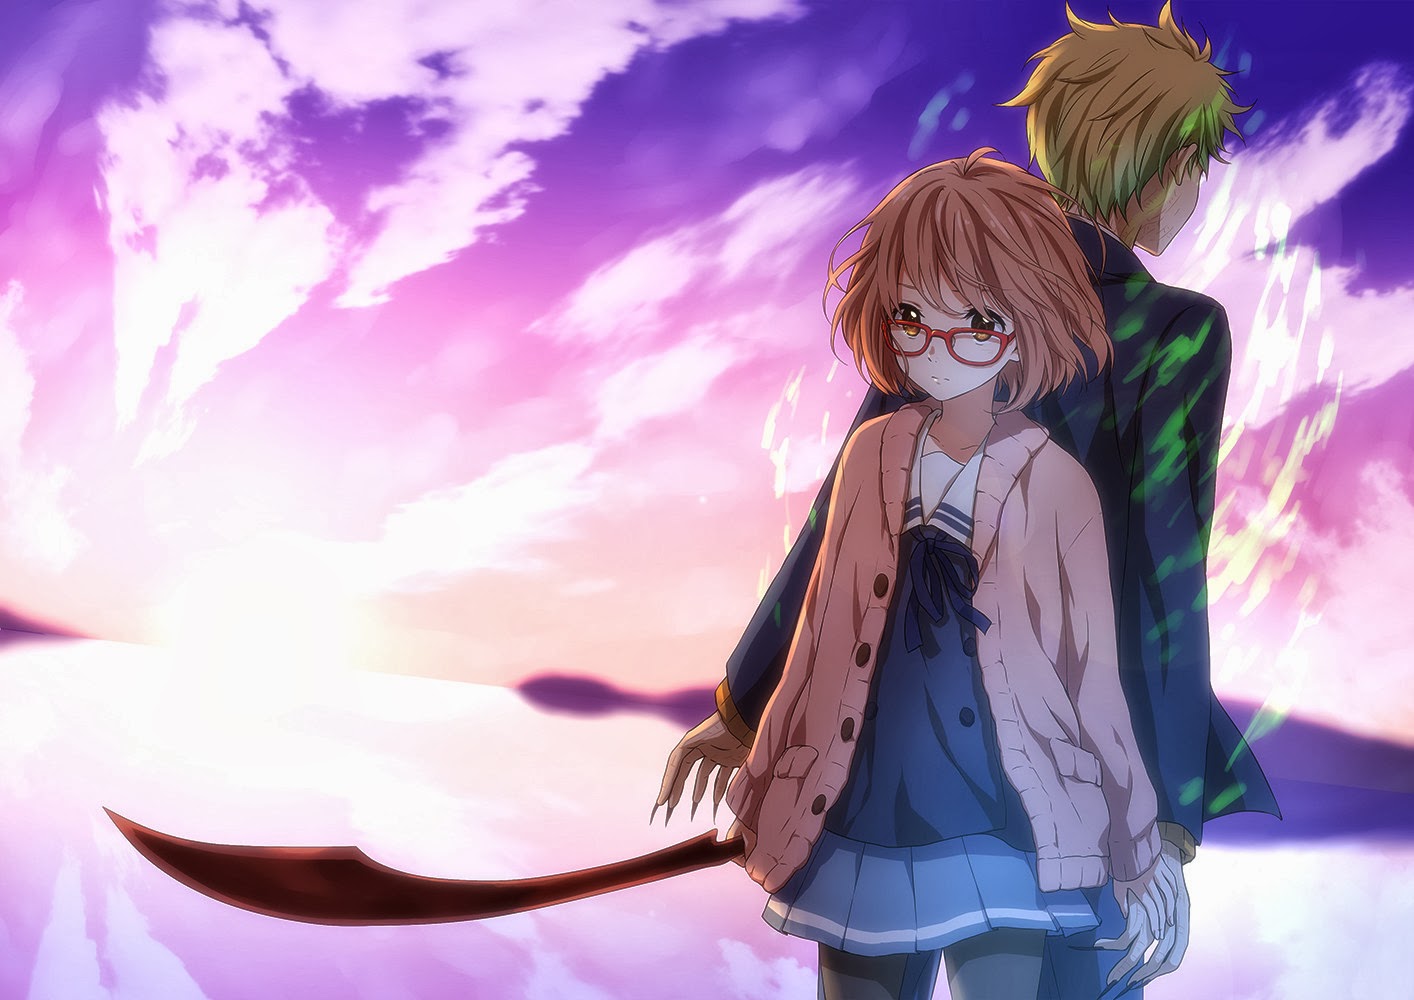 What's With All the Sisconning in Kyoukai no Kanata? –